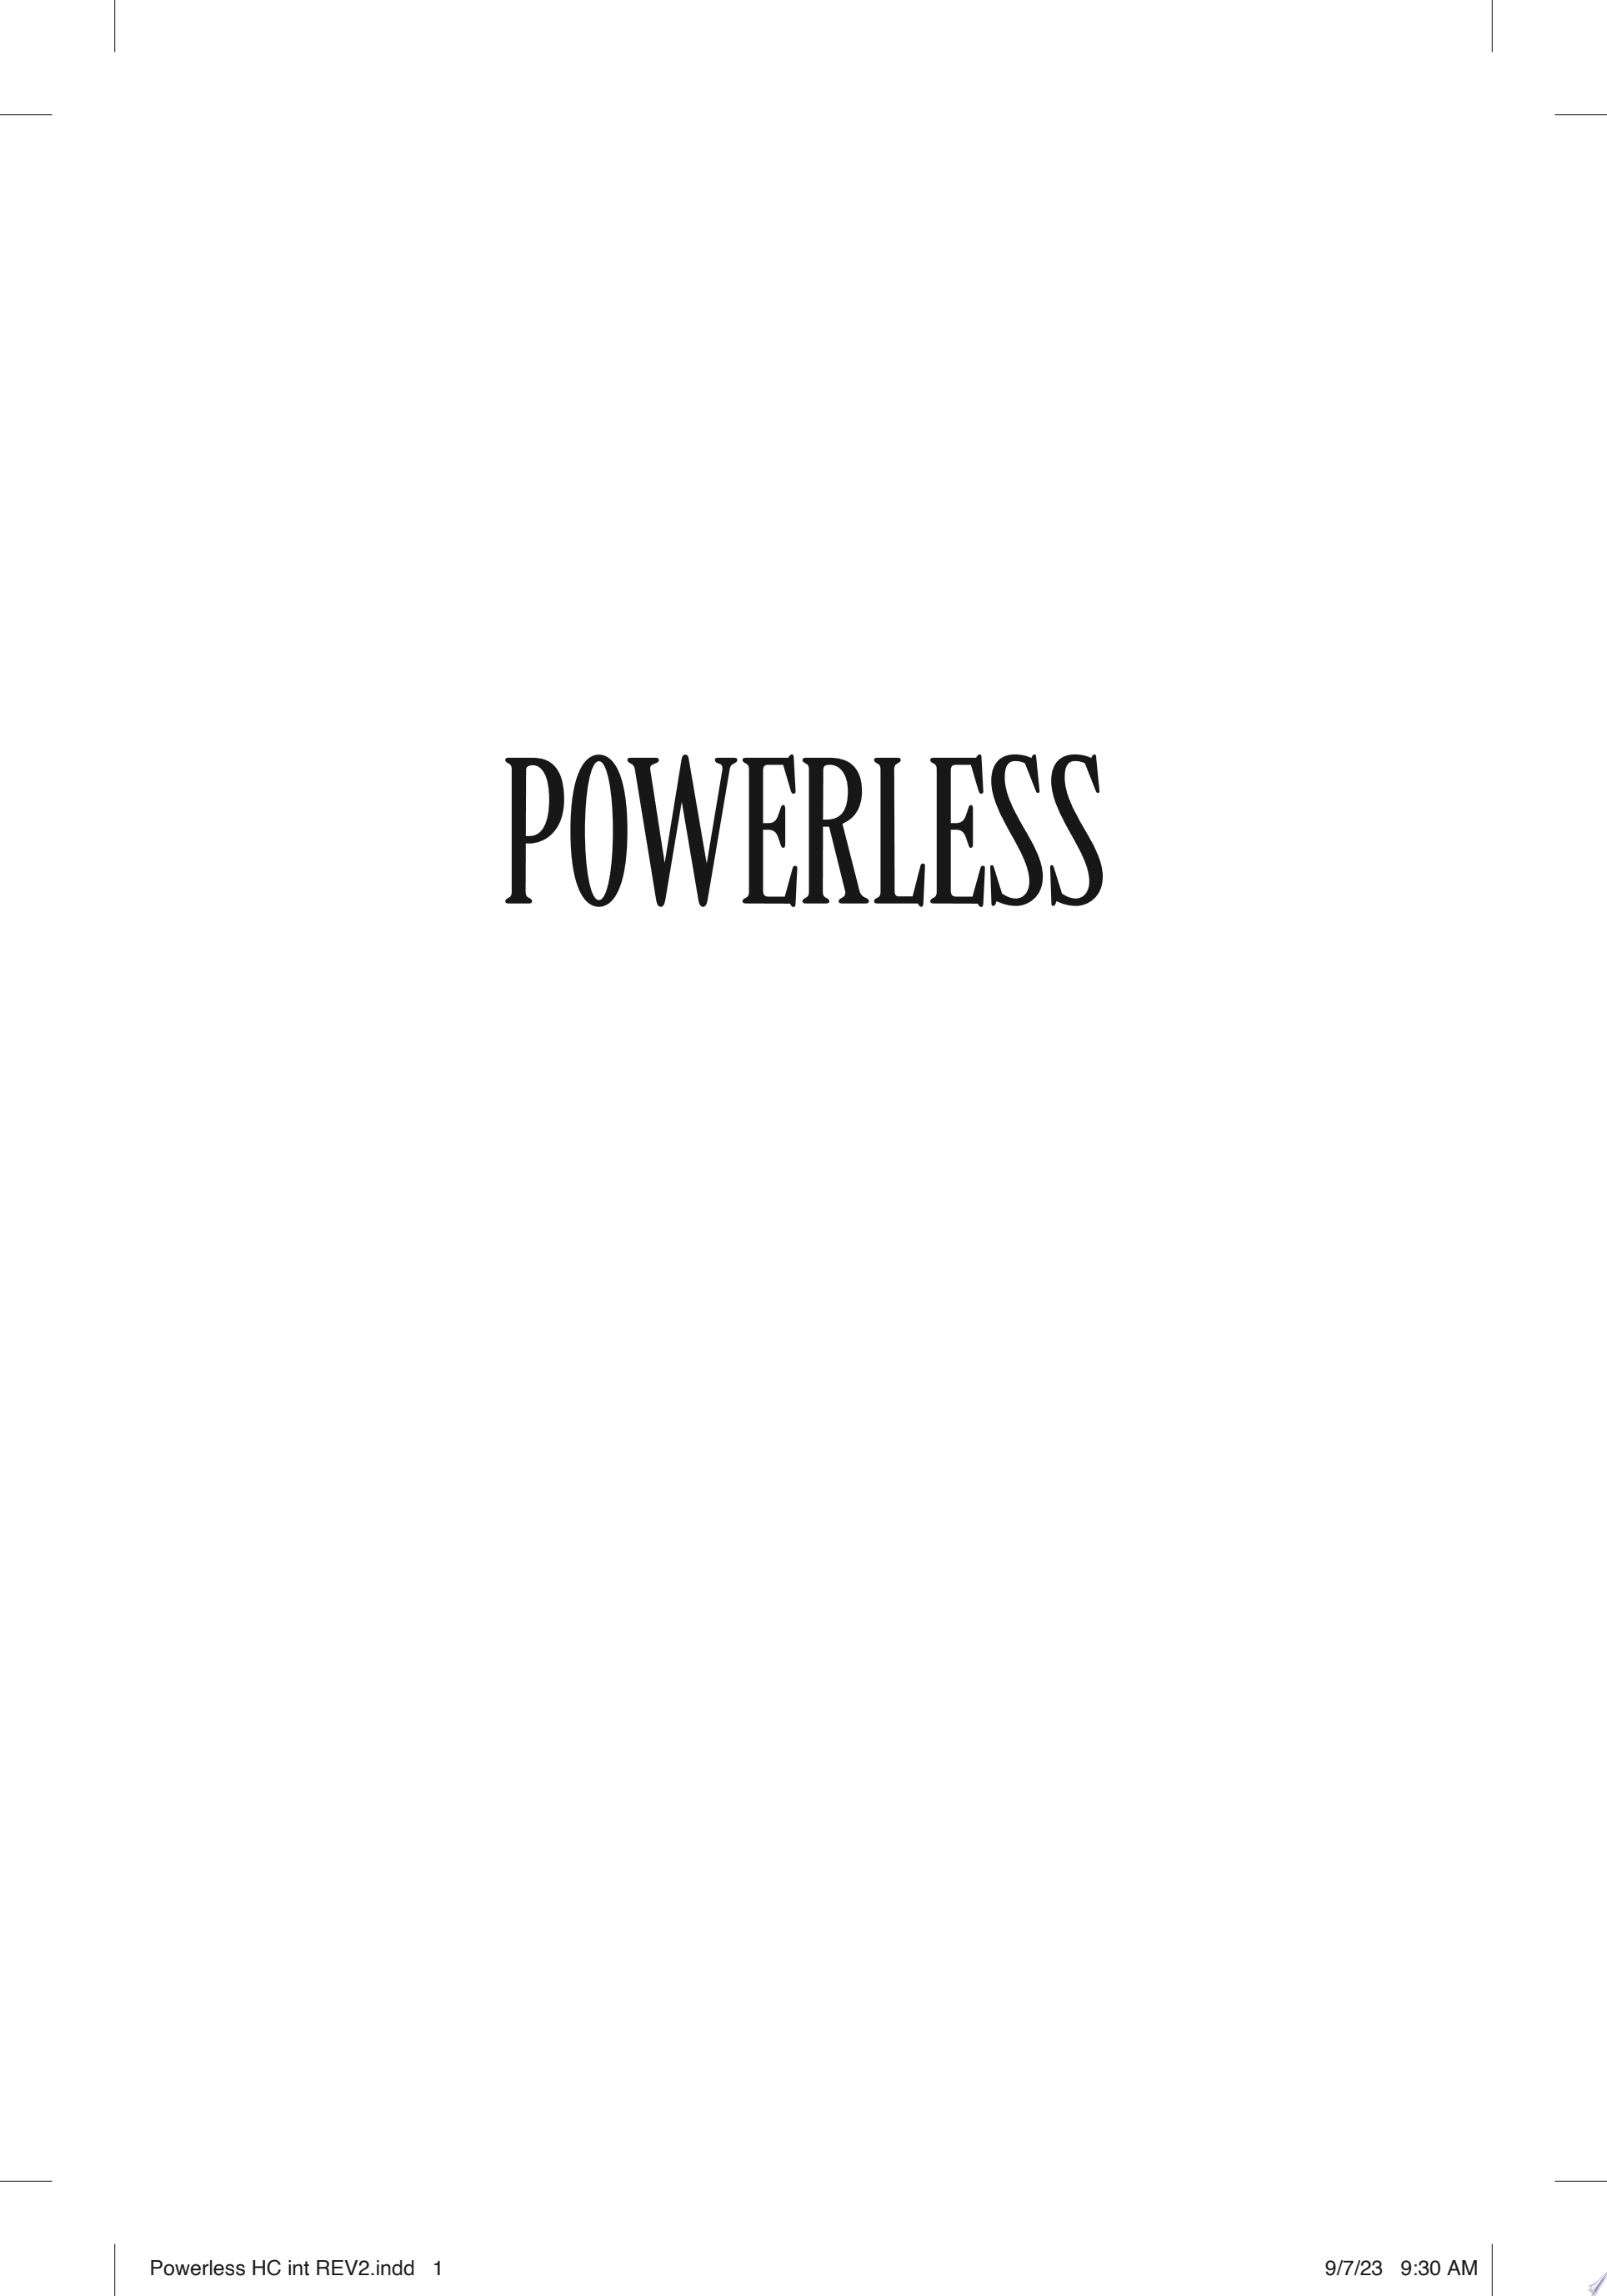 Image for "Powerless"